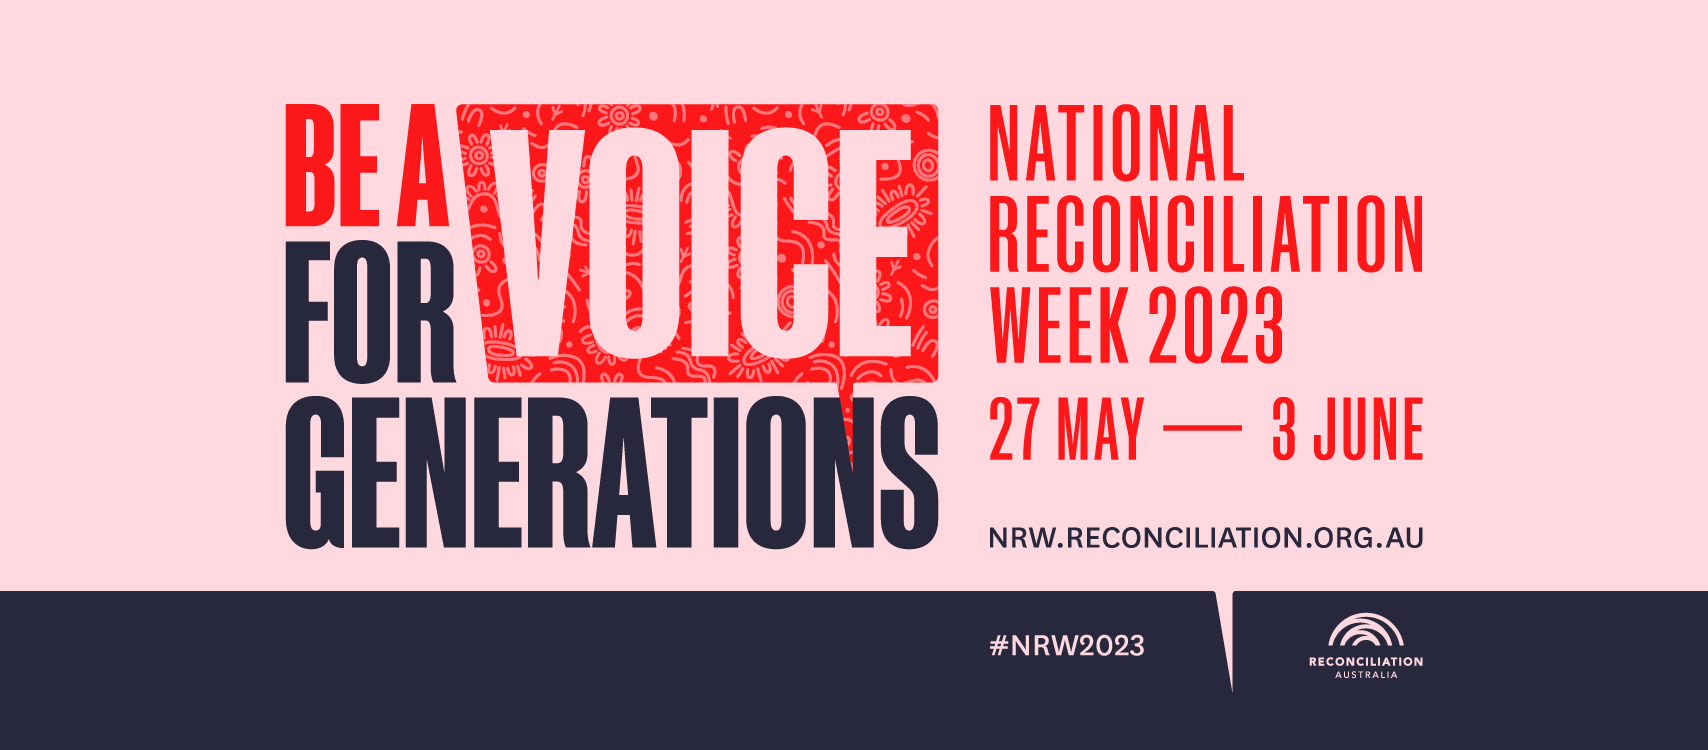 National Reconciliation Week 2023